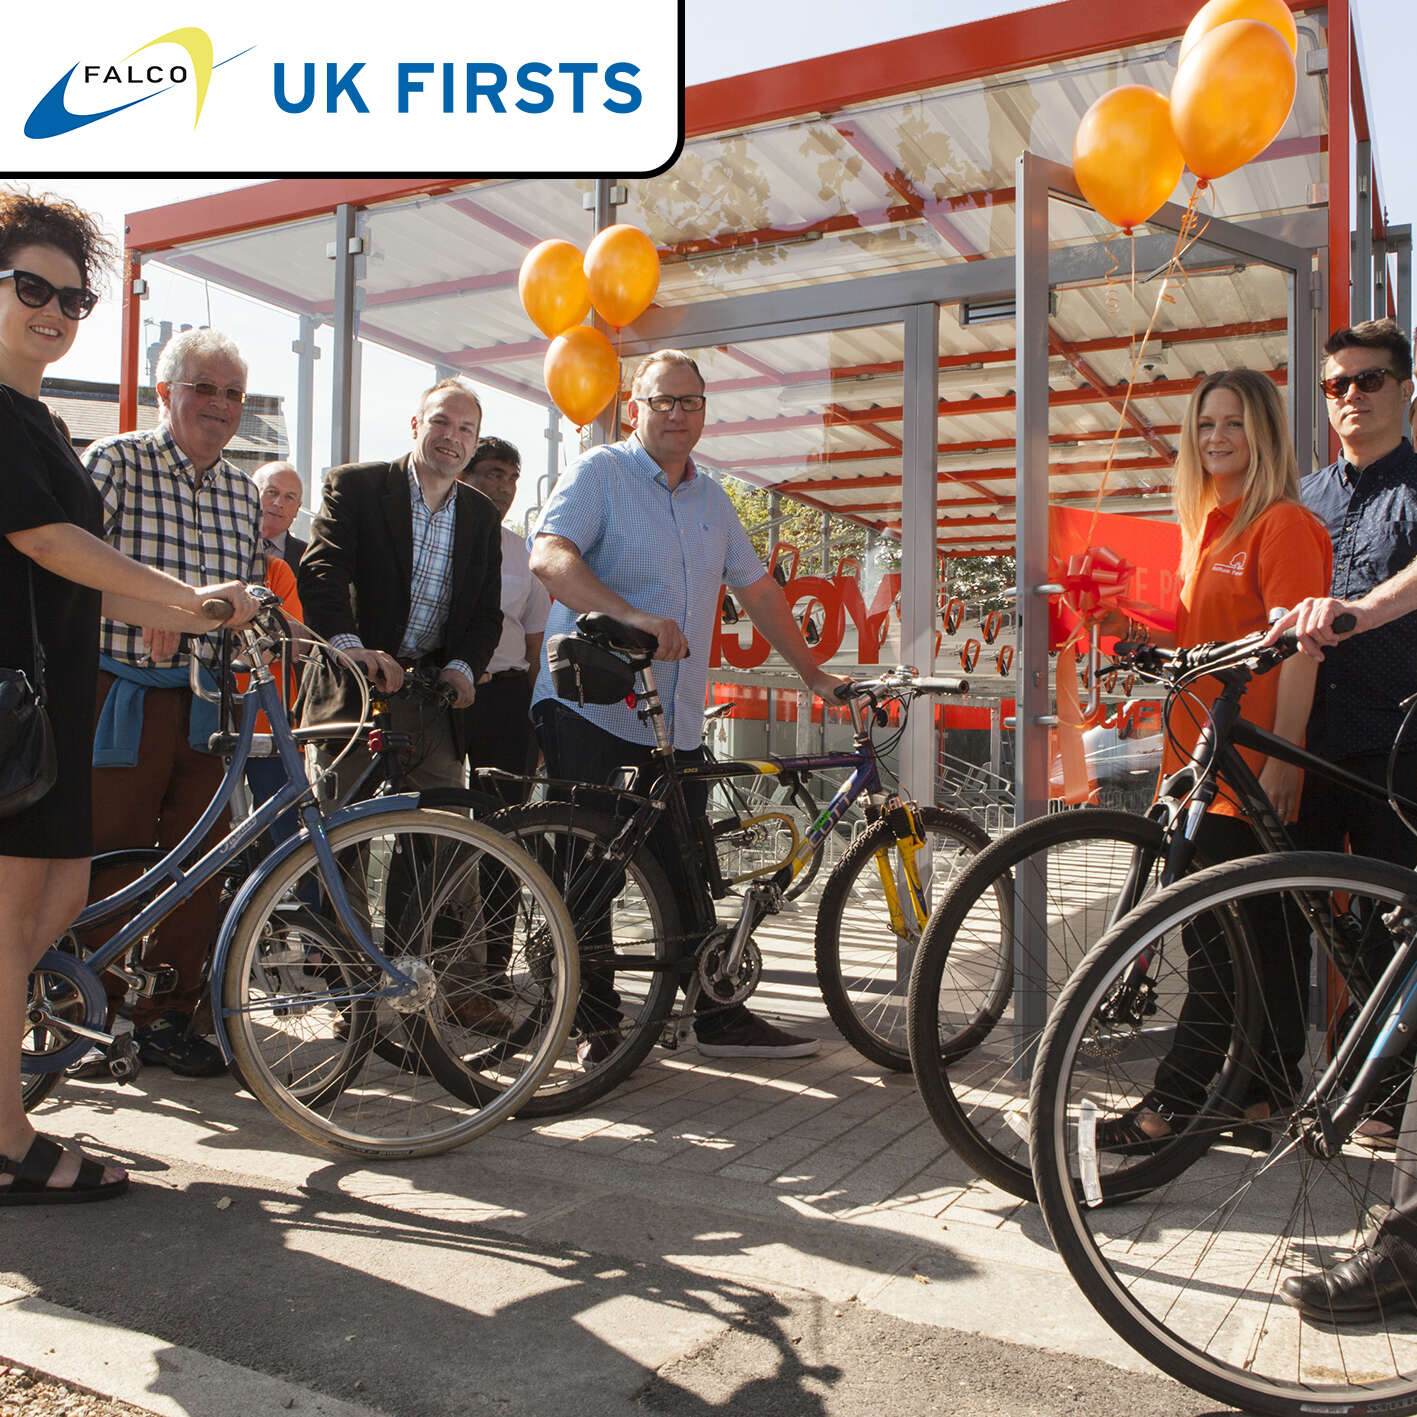 Falco UK Firsts Cycle Parking Schemes